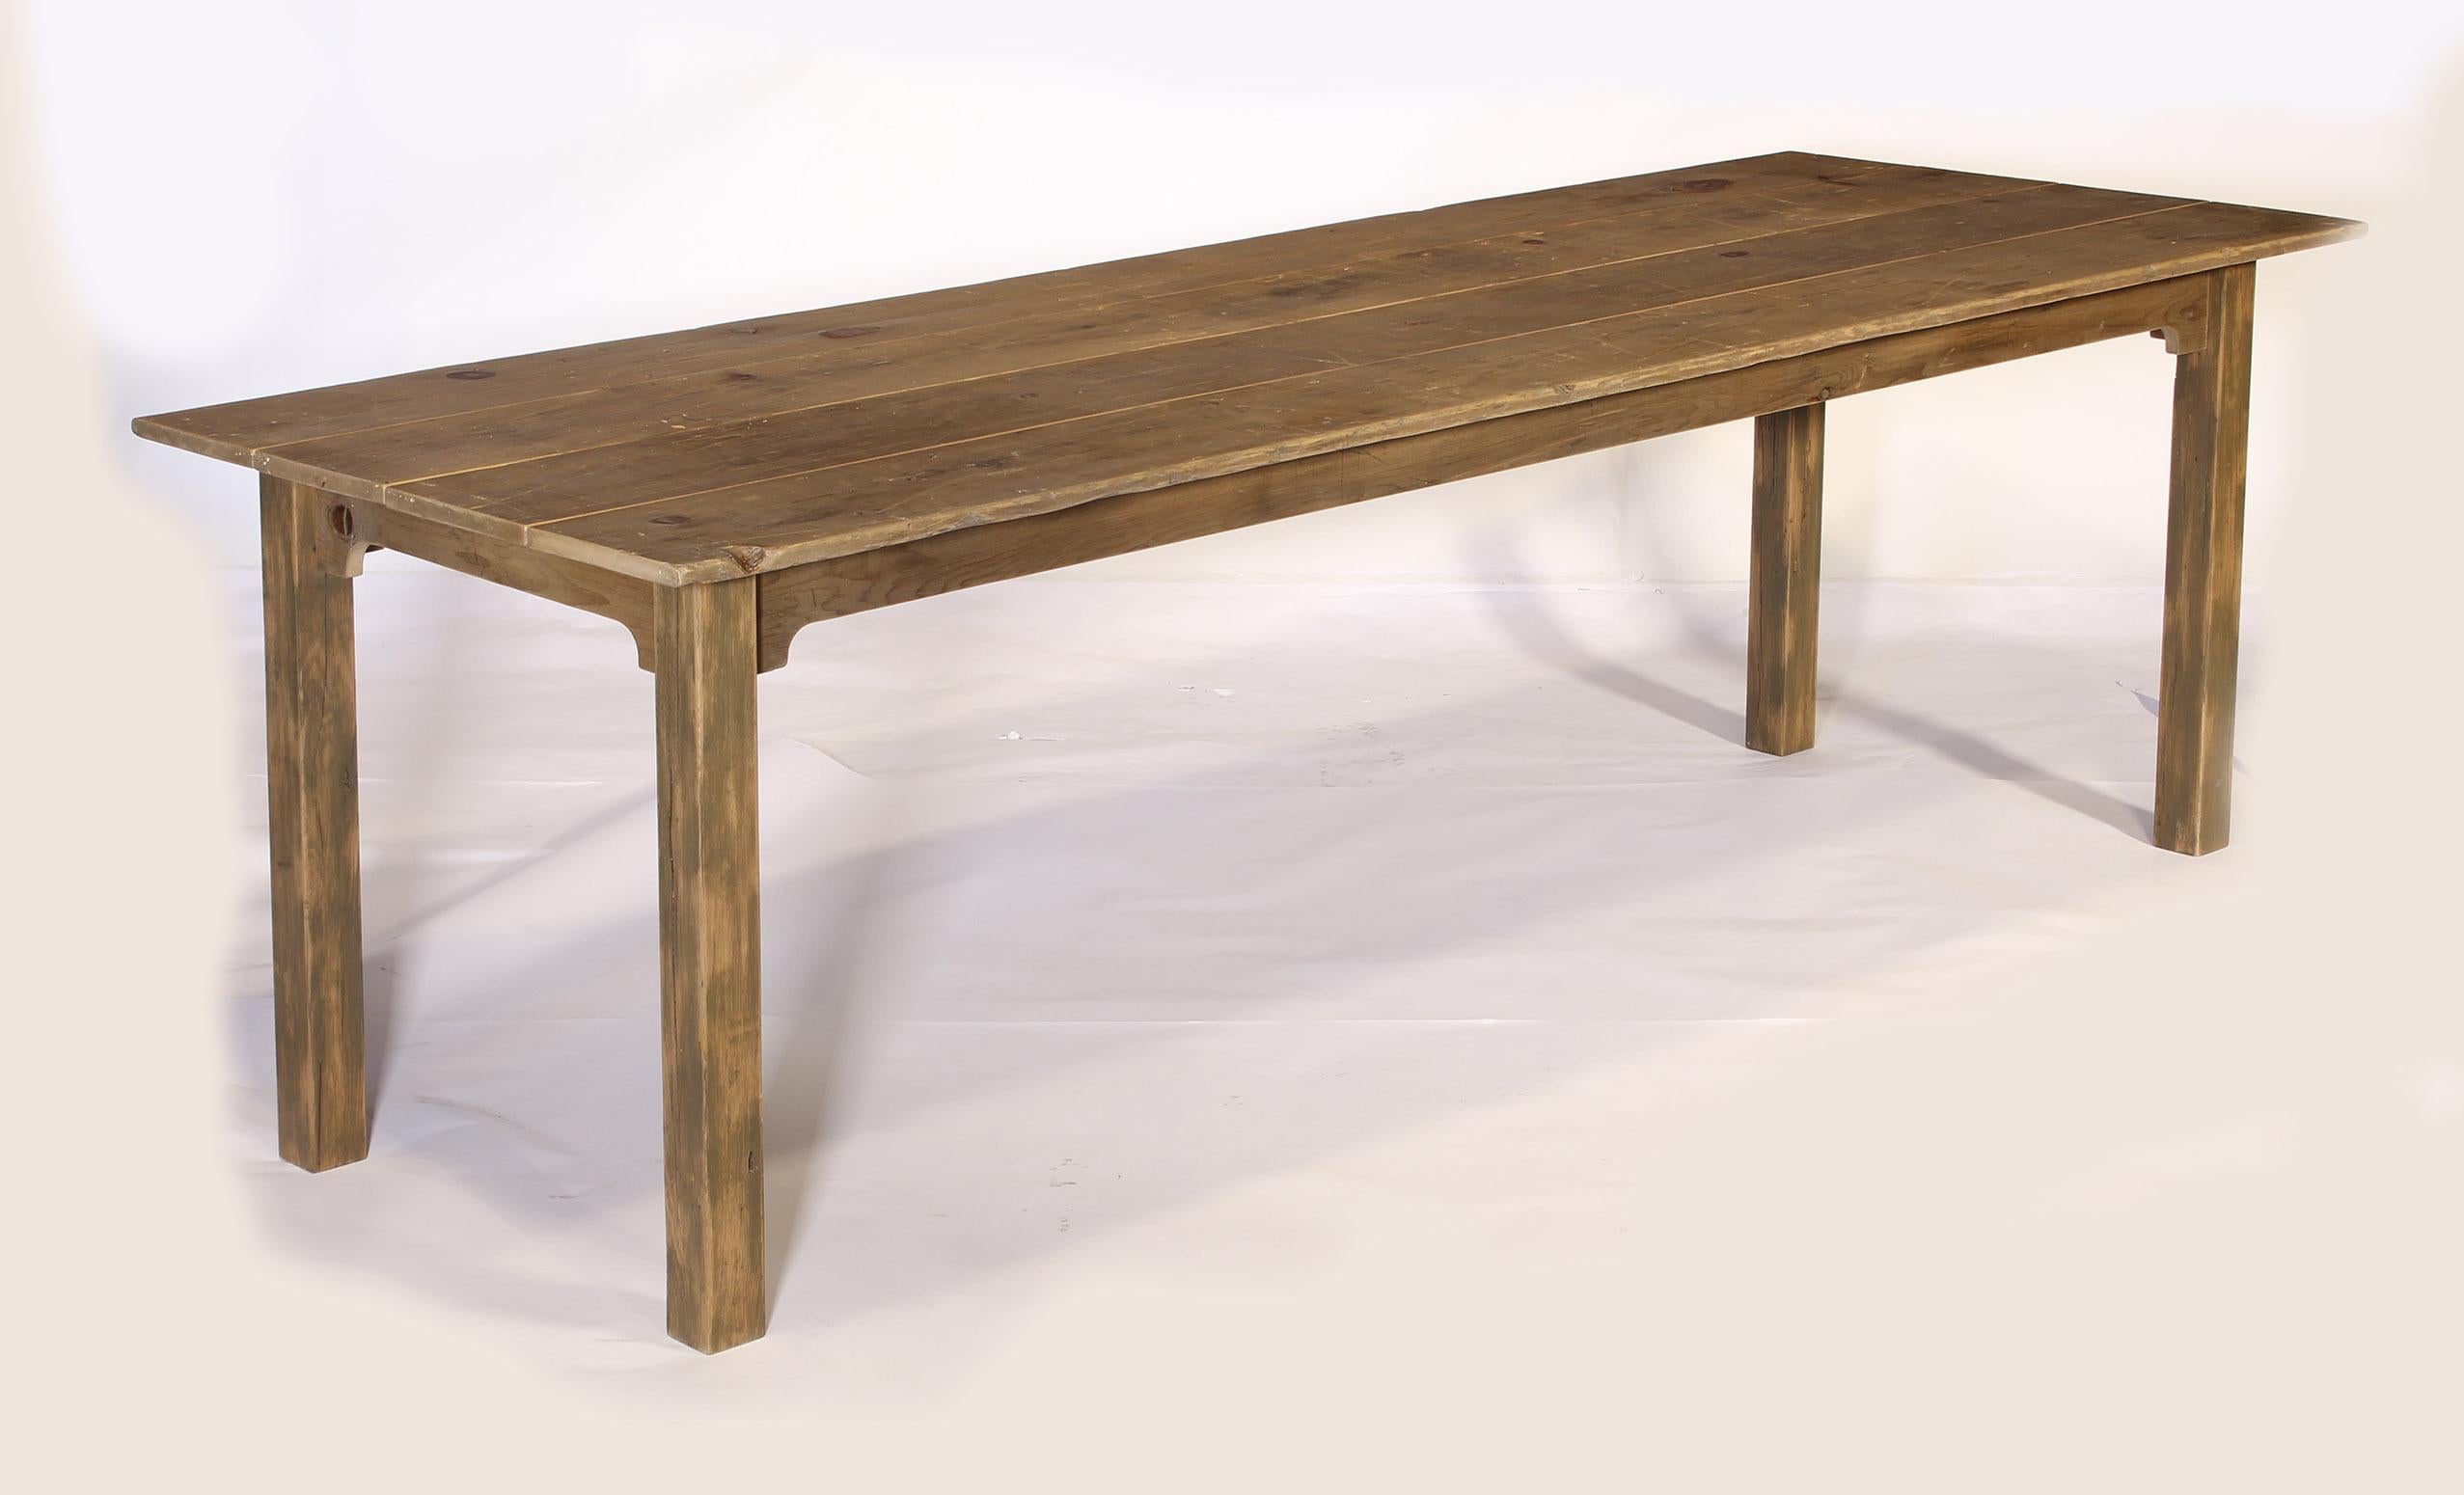 Pine tops were originally used as tobacco sorting tables in New England. Beautifully aged wood with rich history. Table measures eight feet in length, thirty four and a half inches in width, and stands 30 inches tall. Stunning farm / harvest /